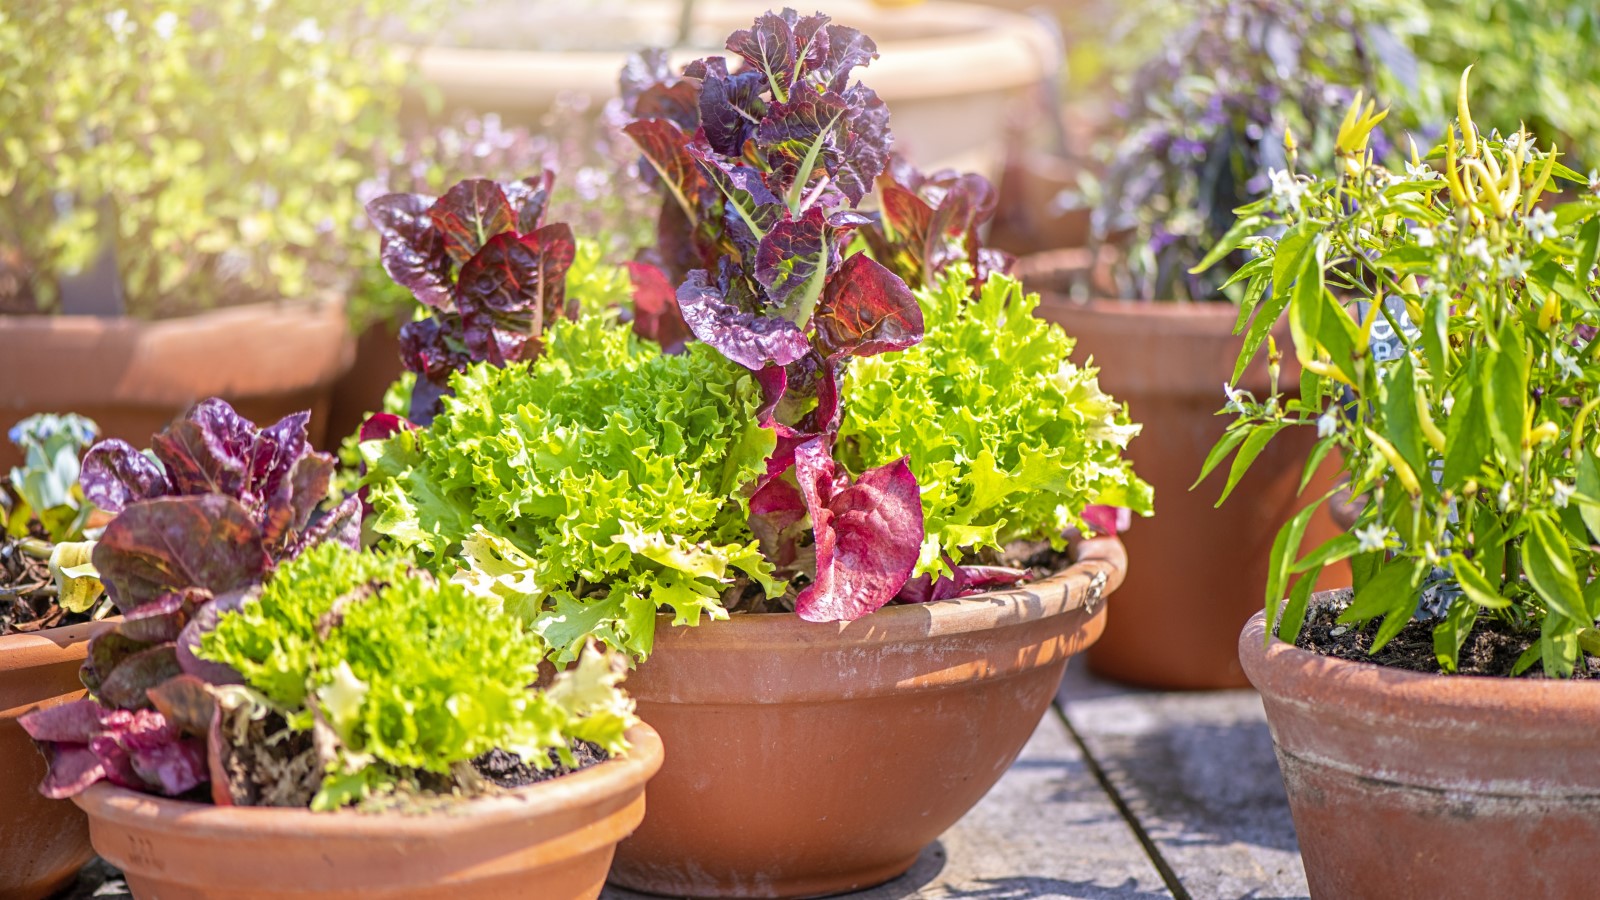 How to grow lettuce in pots: expert tips for container crops